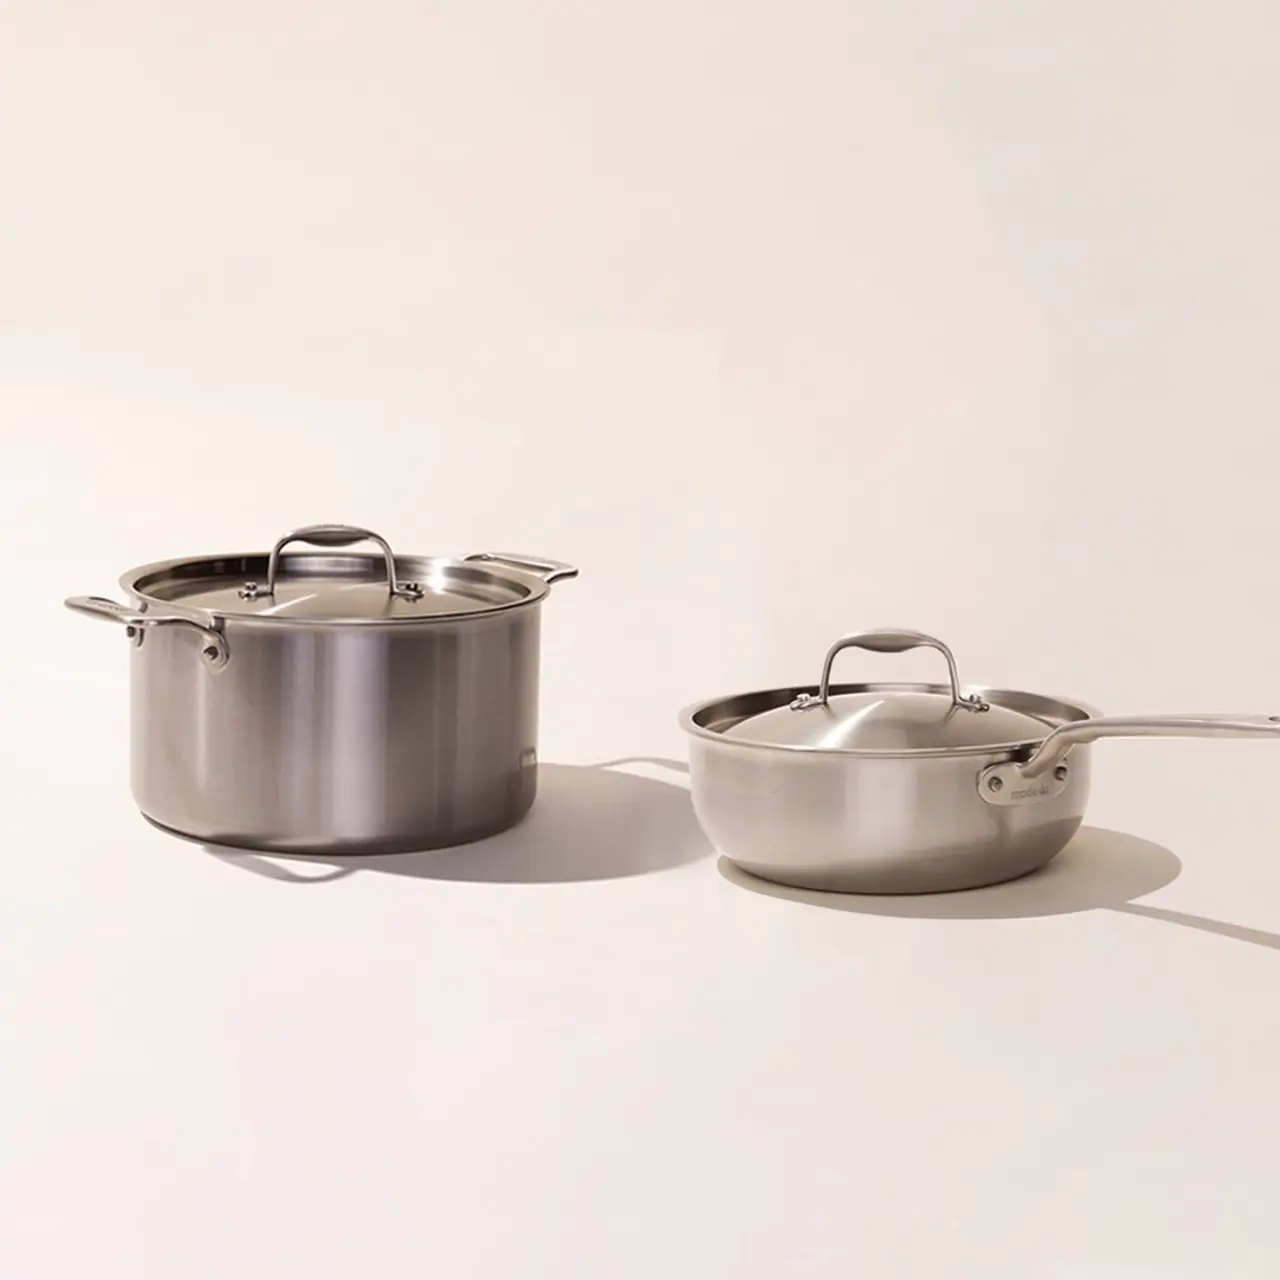 Two stainless steel cooking pots with lids, one with two handles and the other with a long handle, placed on a light background.